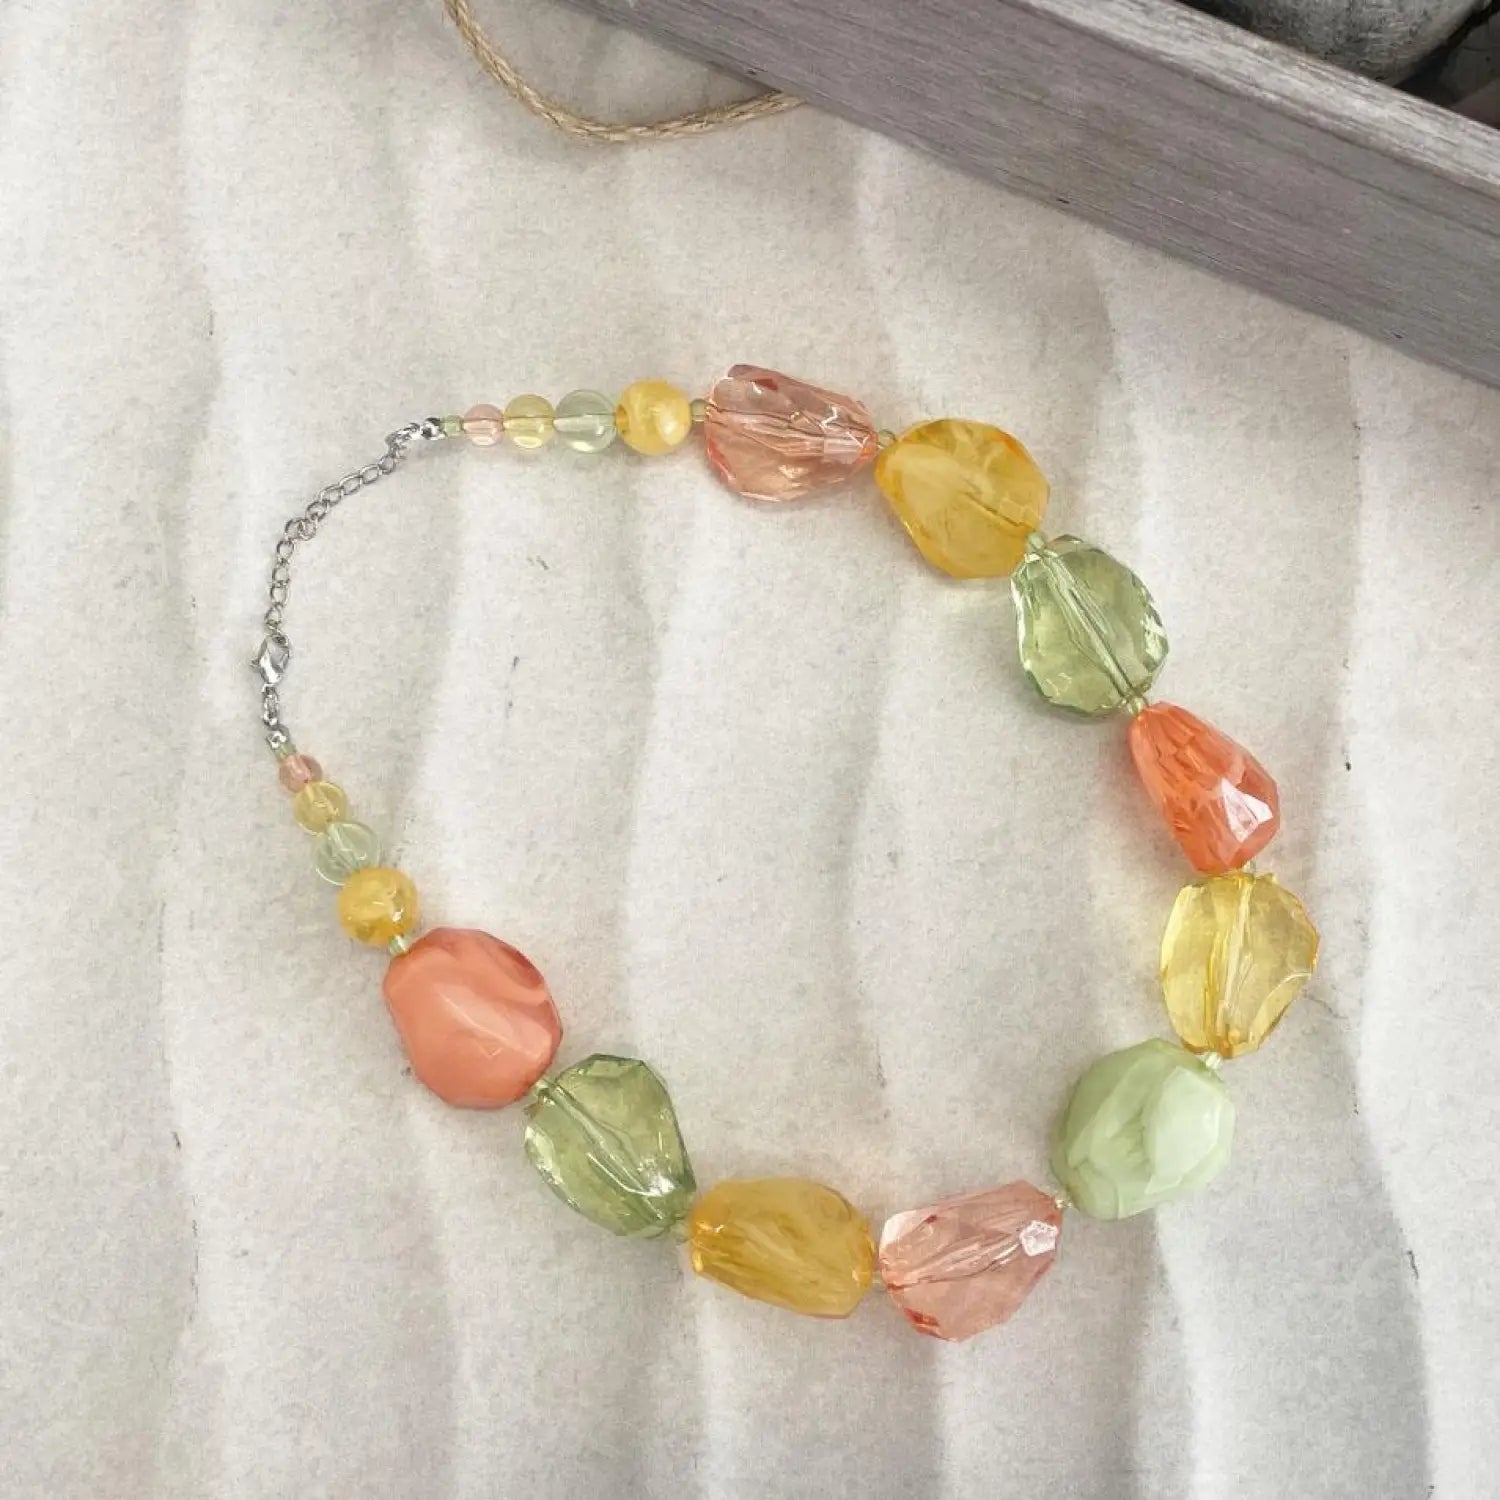 Summer Chunky Bead Necklace with Multi Colored Glass Beads